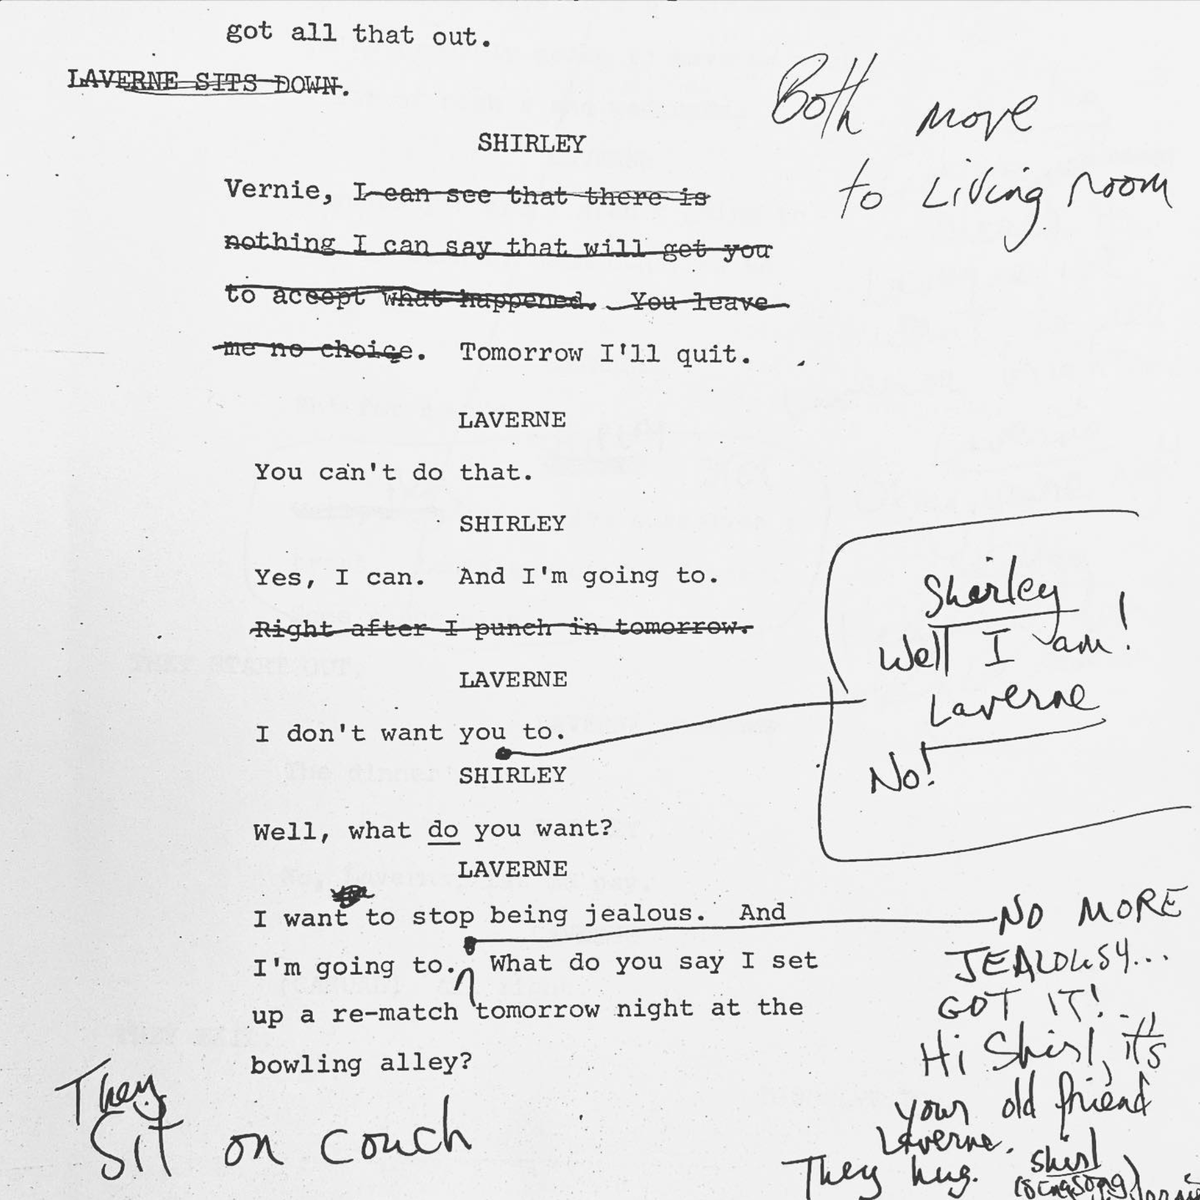 A quick lesson in dialogue from this annotated LAVERNE & SHIRLEY script: Less is more! “It’s the Water” by Greg Strangis / From the Dennis Klein Collection